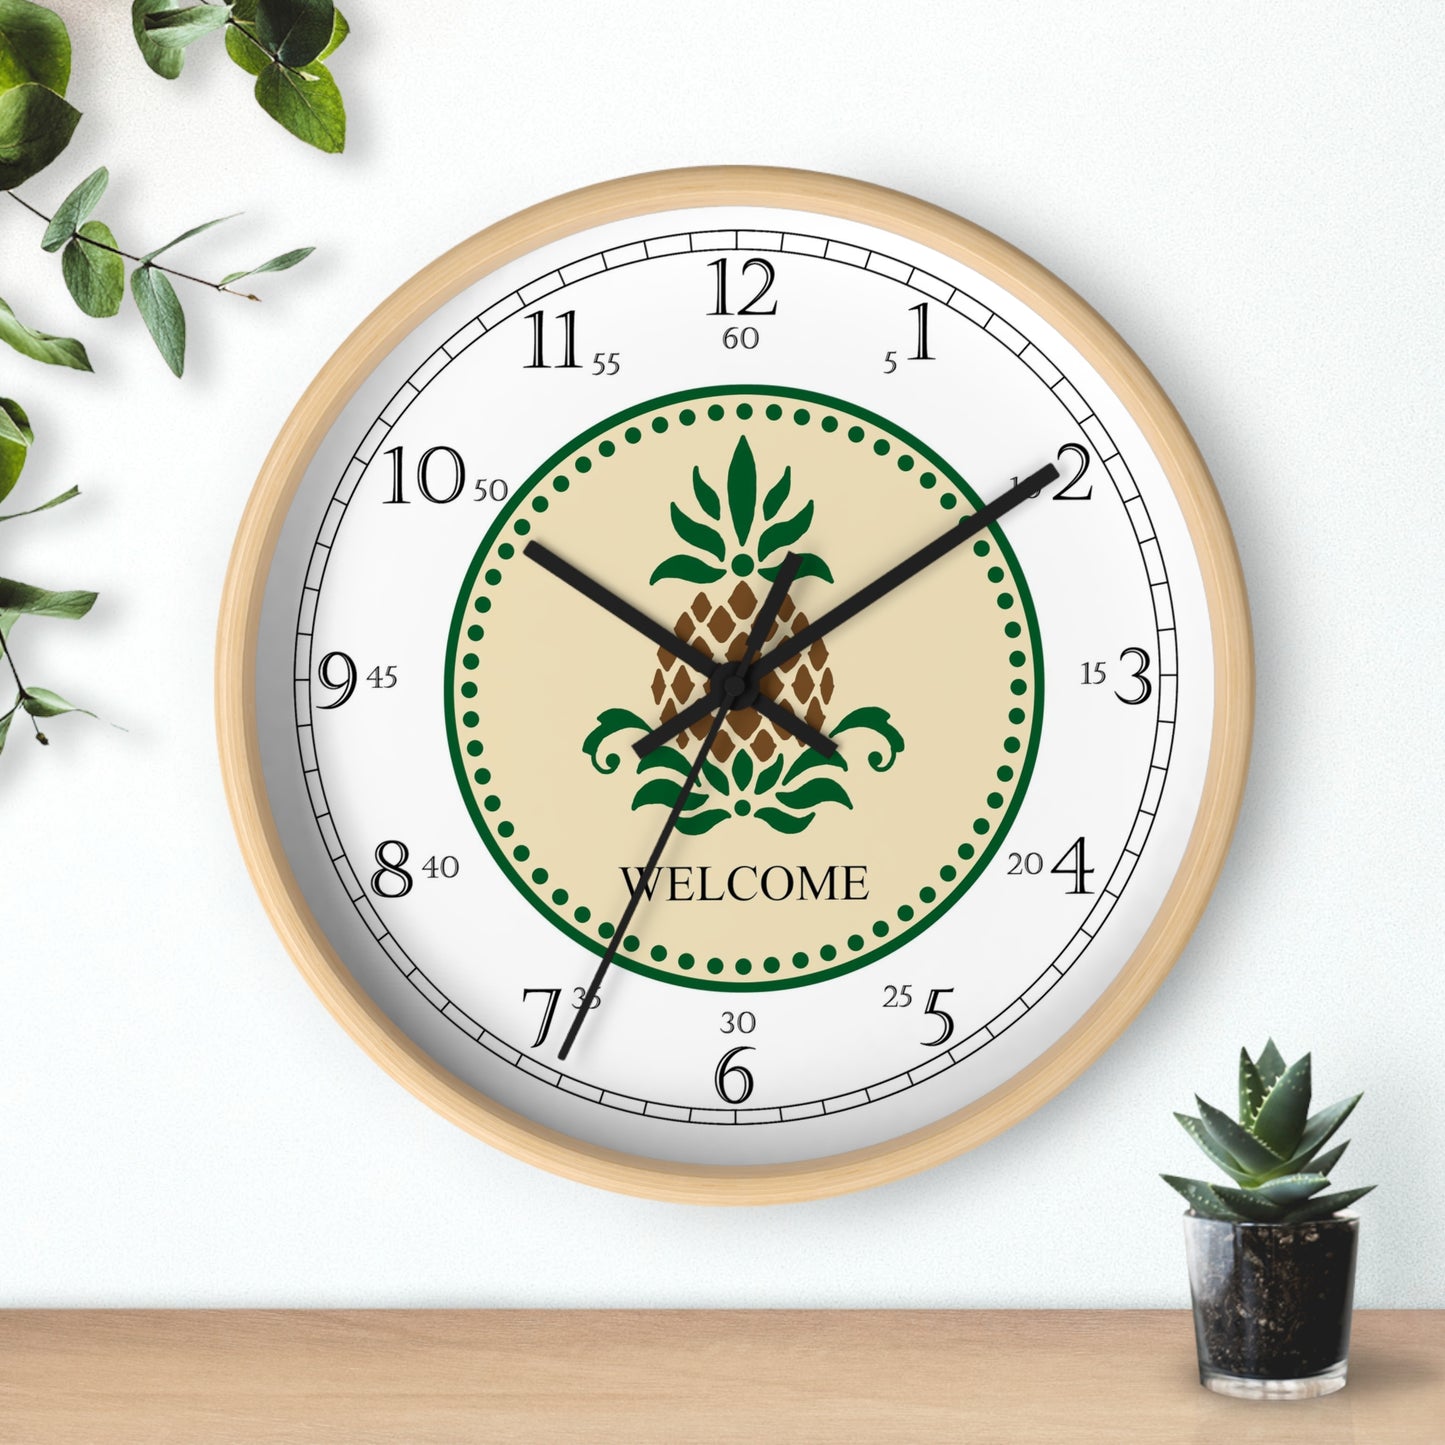 The Welcome Folk Art Design English Numeral Clock is a reproduction of a fine art design by artist Lee M. Buchanan. The pineapple has long been a symbol of welcome and hospitality. Place this stunning Folk Art Design clock on your wall and say "Welcome!" to all who visit and enjoy your special hospitality.